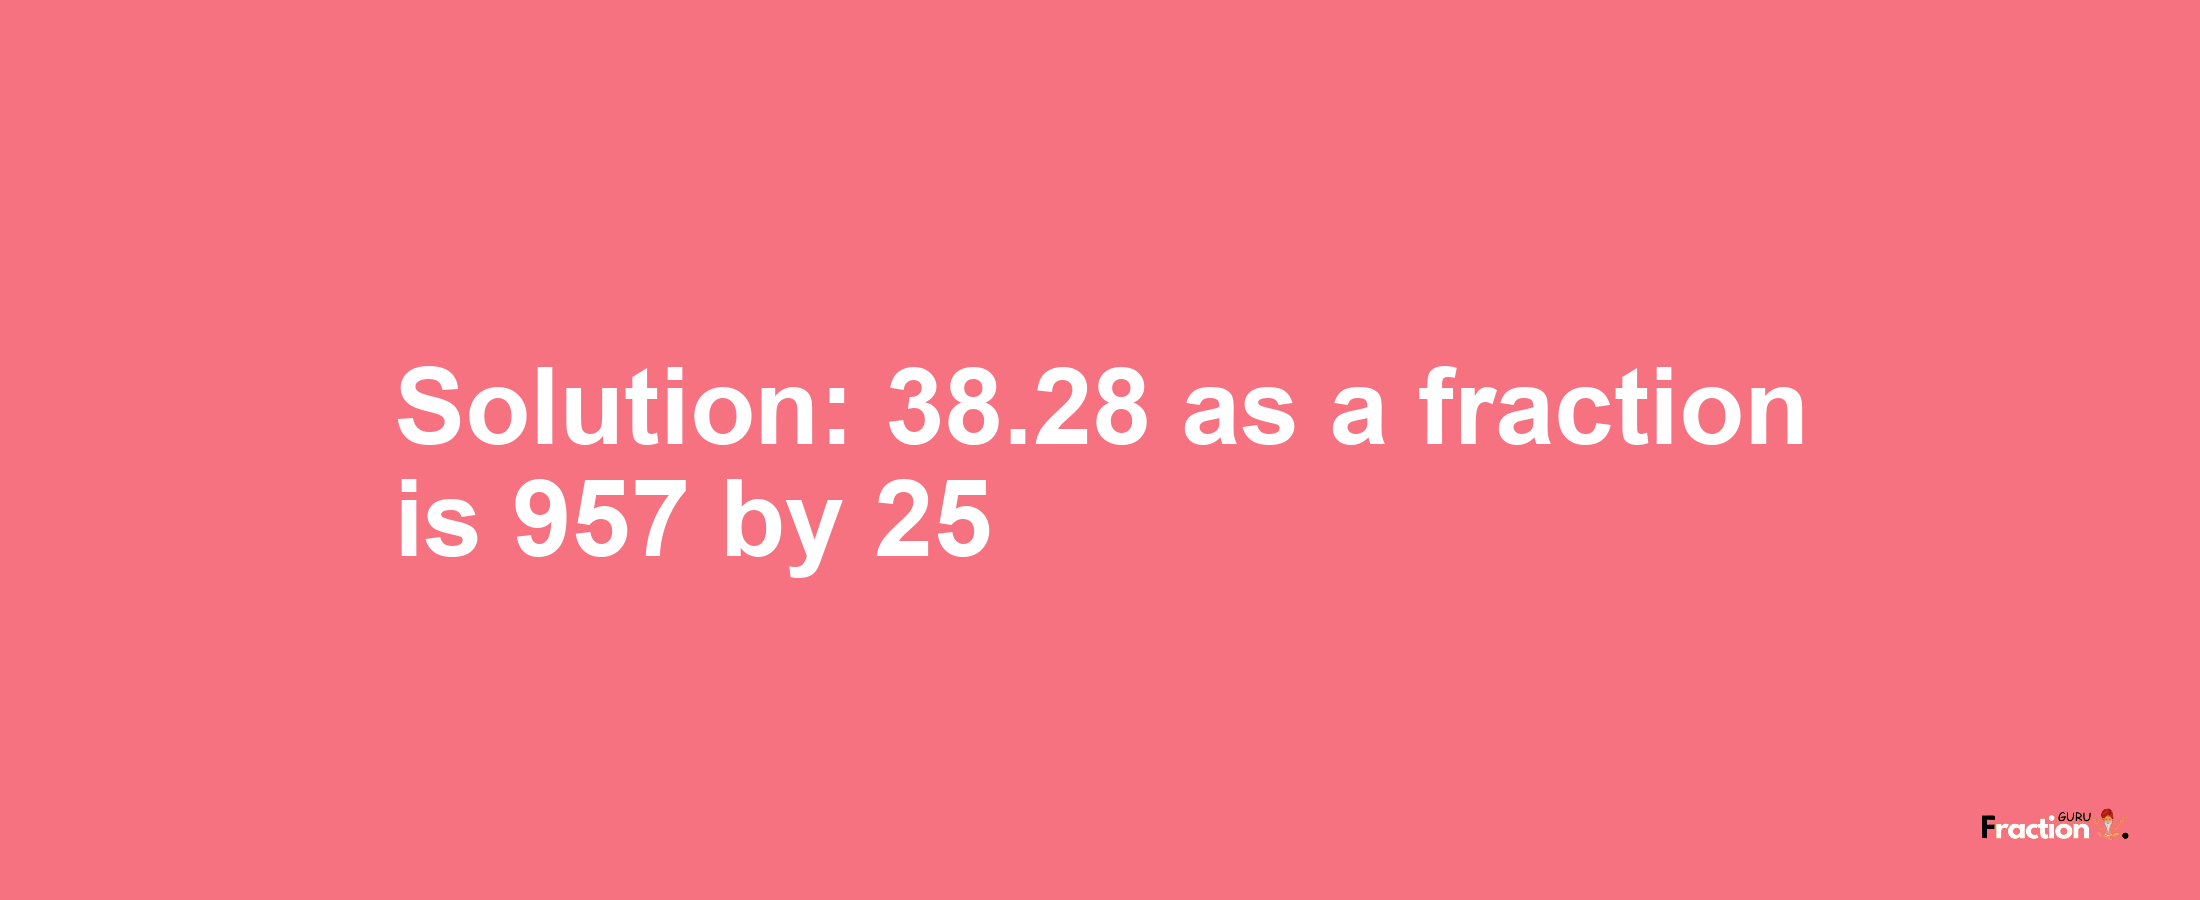 Solution:38.28 as a fraction is 957/25